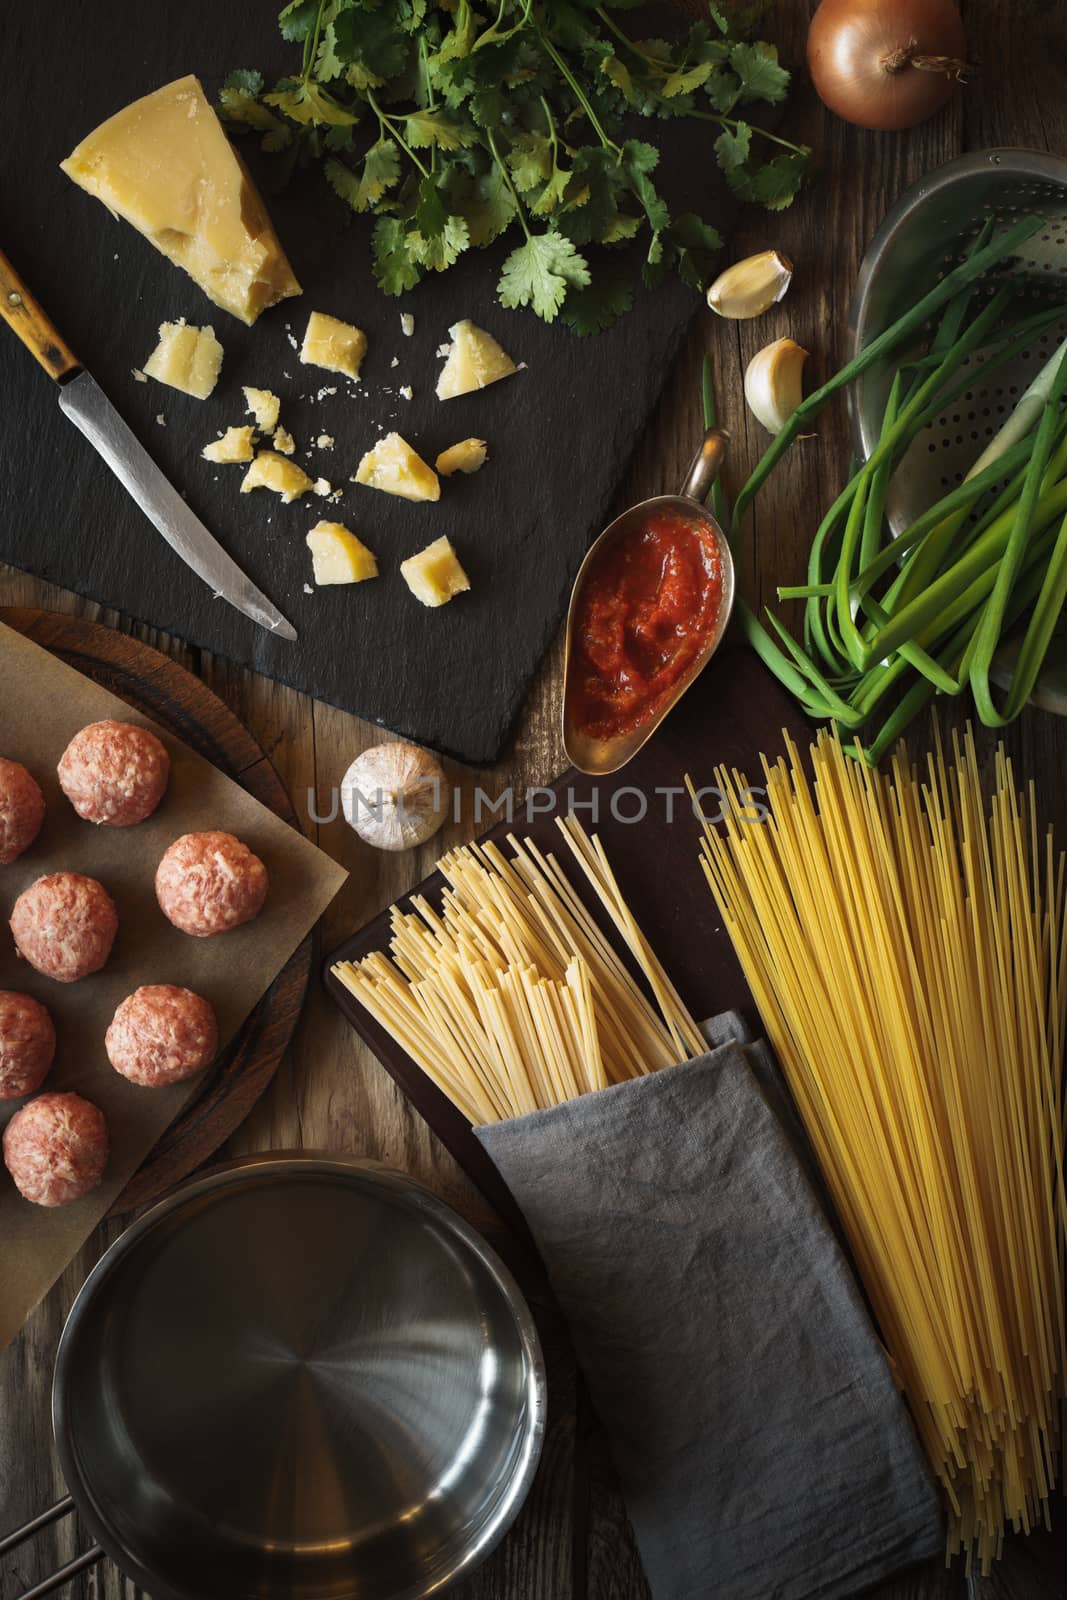 Ingredients for cooking spaghetti, meatballs with cheese and fresh herbs by Deniskarpenkov